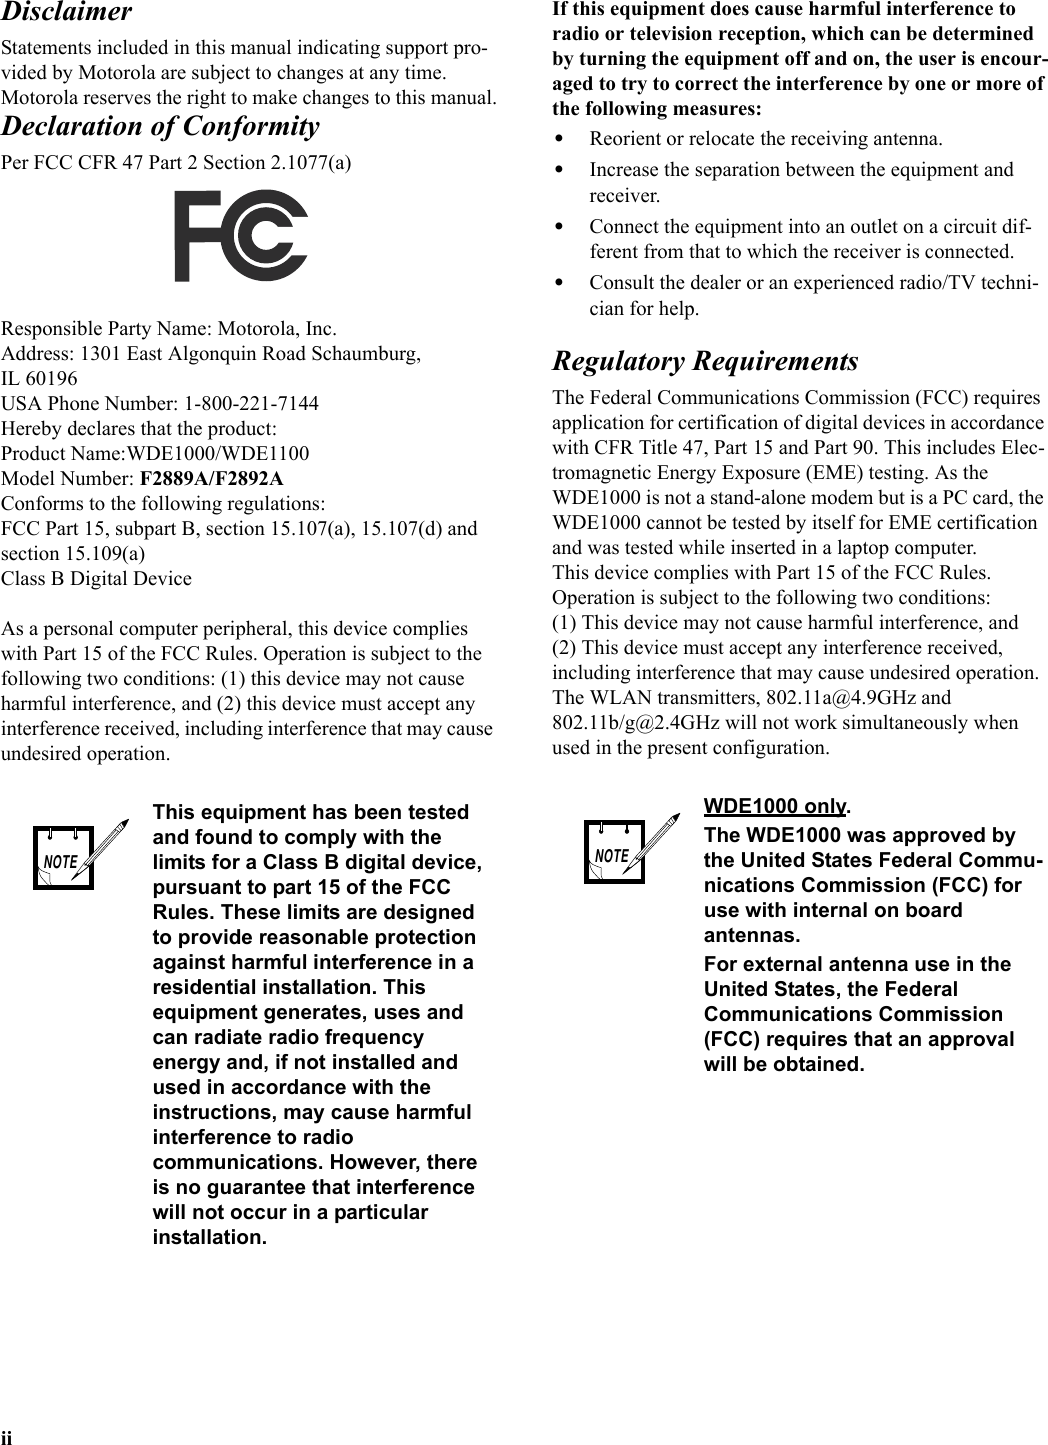 iiDisclaimerStatements included in this manual indicating support pro-vided by Motorola are subject to changes at any time. Motorola reserves the right to make changes to this manual.Declaration of ConformityPer FCC CFR 47 Part 2 Section 2.1077(a)Responsible Party Name: Motorola, Inc.Address: 1301 East Algonquin Road Schaumburg, IL 60196 USA Phone Number: 1-800-221-7144Hereby declares that the product:Product Name:WDE1000/WDE1100Model Number: F2889A/F2892AConforms to the following regulations:FCC Part 15, subpart B, section 15.107(a), 15.107(d) and section 15.109(a)Class B Digital DeviceAs a personal computer peripheral, this device complies with Part 15 of the FCC Rules. Operation is subject to the following two conditions: (1) this device may not cause harmful interference, and (2) this device must accept any interference received, including interference that may cause undesired operation.If this equipment does cause harmful interference to radio or television reception, which can be determined by turning the equipment off and on, the user is encour-aged to try to correct the interference by one or more of the following measures:•Reorient or relocate the receiving antenna.•Increase the separation between the equipment and receiver.•Connect the equipment into an outlet on a circuit dif-ferent from that to which the receiver is connected.•Consult the dealer or an experienced radio/TV techni-cian for help.Regulatory RequirementsThe Federal Communications Commission (FCC) requires application for certification of digital devices in accordance with CFR Title 47, Part 15 and Part 90. This includes Elec-tromagnetic Energy Exposure (EME) testing. As the WDE1000 is not a stand-alone modem but is a PC card, the WDE1000 cannot be tested by itself for EME certification and was tested while inserted in a laptop computer.This device complies with Part 15 of the FCC Rules.Operation is subject to the following two conditions:(1) This device may not cause harmful interference, and(2) This device must accept any interference received, including interference that may cause undesired operation.The WLAN transmitters, 802.11a@4.9GHz and 802.11b/g@2.4GHz will not work simultaneously when used in the present configuration.This equipment has been tested and found to comply with the limits for a Class B digital device, pursuant to part 15 of the FCC Rules. These limits are designed to provide reasonable protection against harmful interference in a residential installation. This equipment generates, uses and can radiate radio frequency energy and, if not installed and used in accordance with the instructions, may cause harmful interference to radio communications. However, there is no guarantee that interference will not occur in a particular installation.NOTEWDE1000 only.The WDE1000 was approved by the United States Federal Commu-nications Commission (FCC) for use with internal on board antennas.For external antenna use in the United States, the Federal Communications Commission (FCC) requires that an approval will be obtained.NOTE